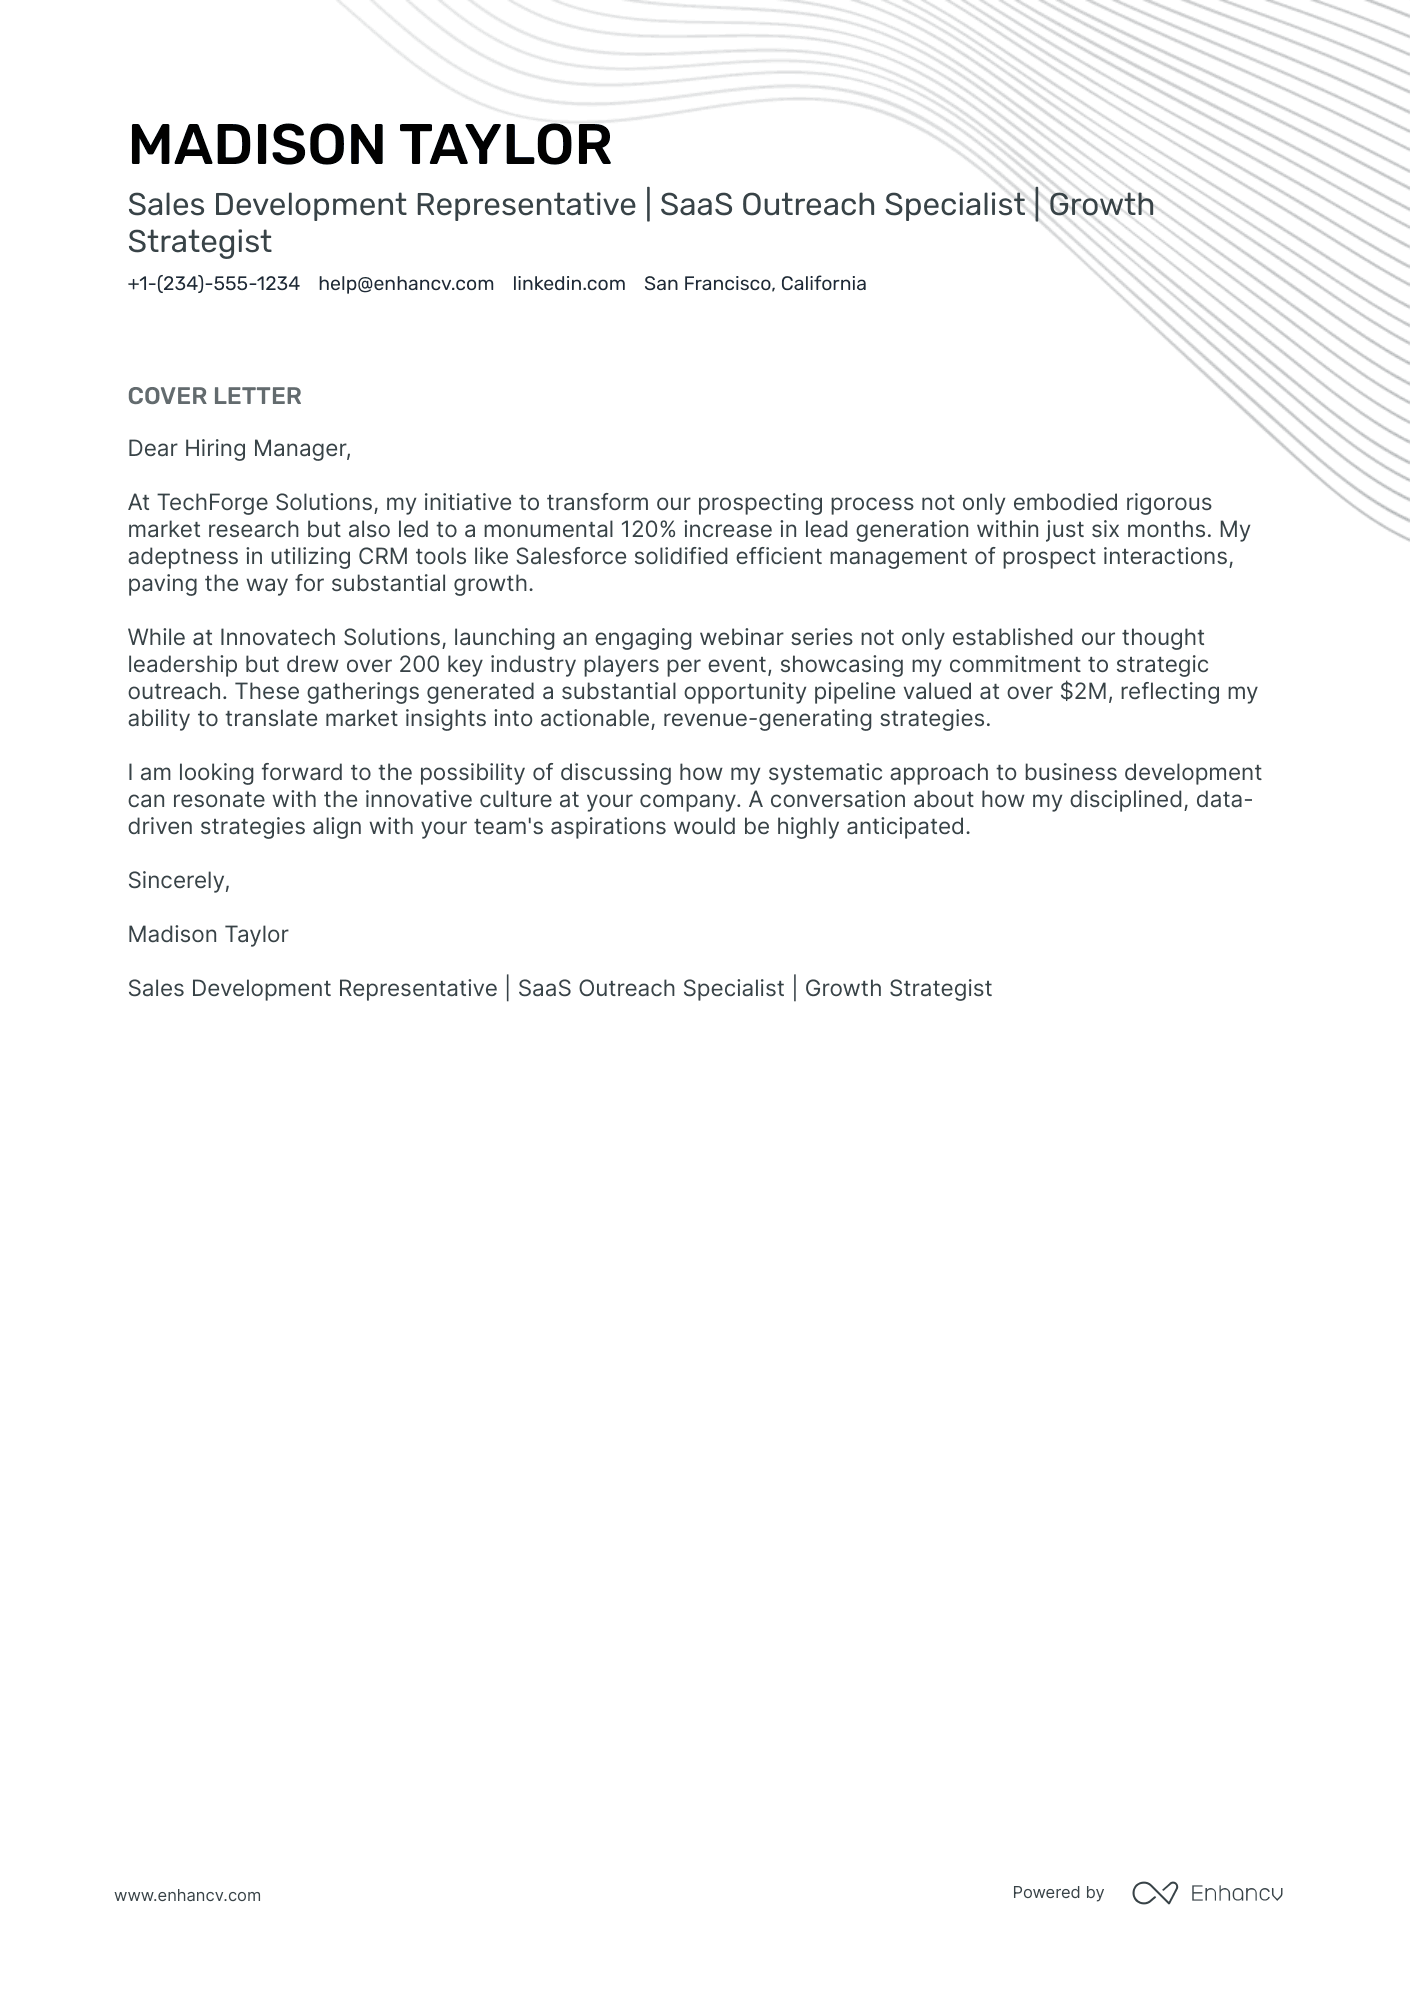 sample of an application letter for sales representative